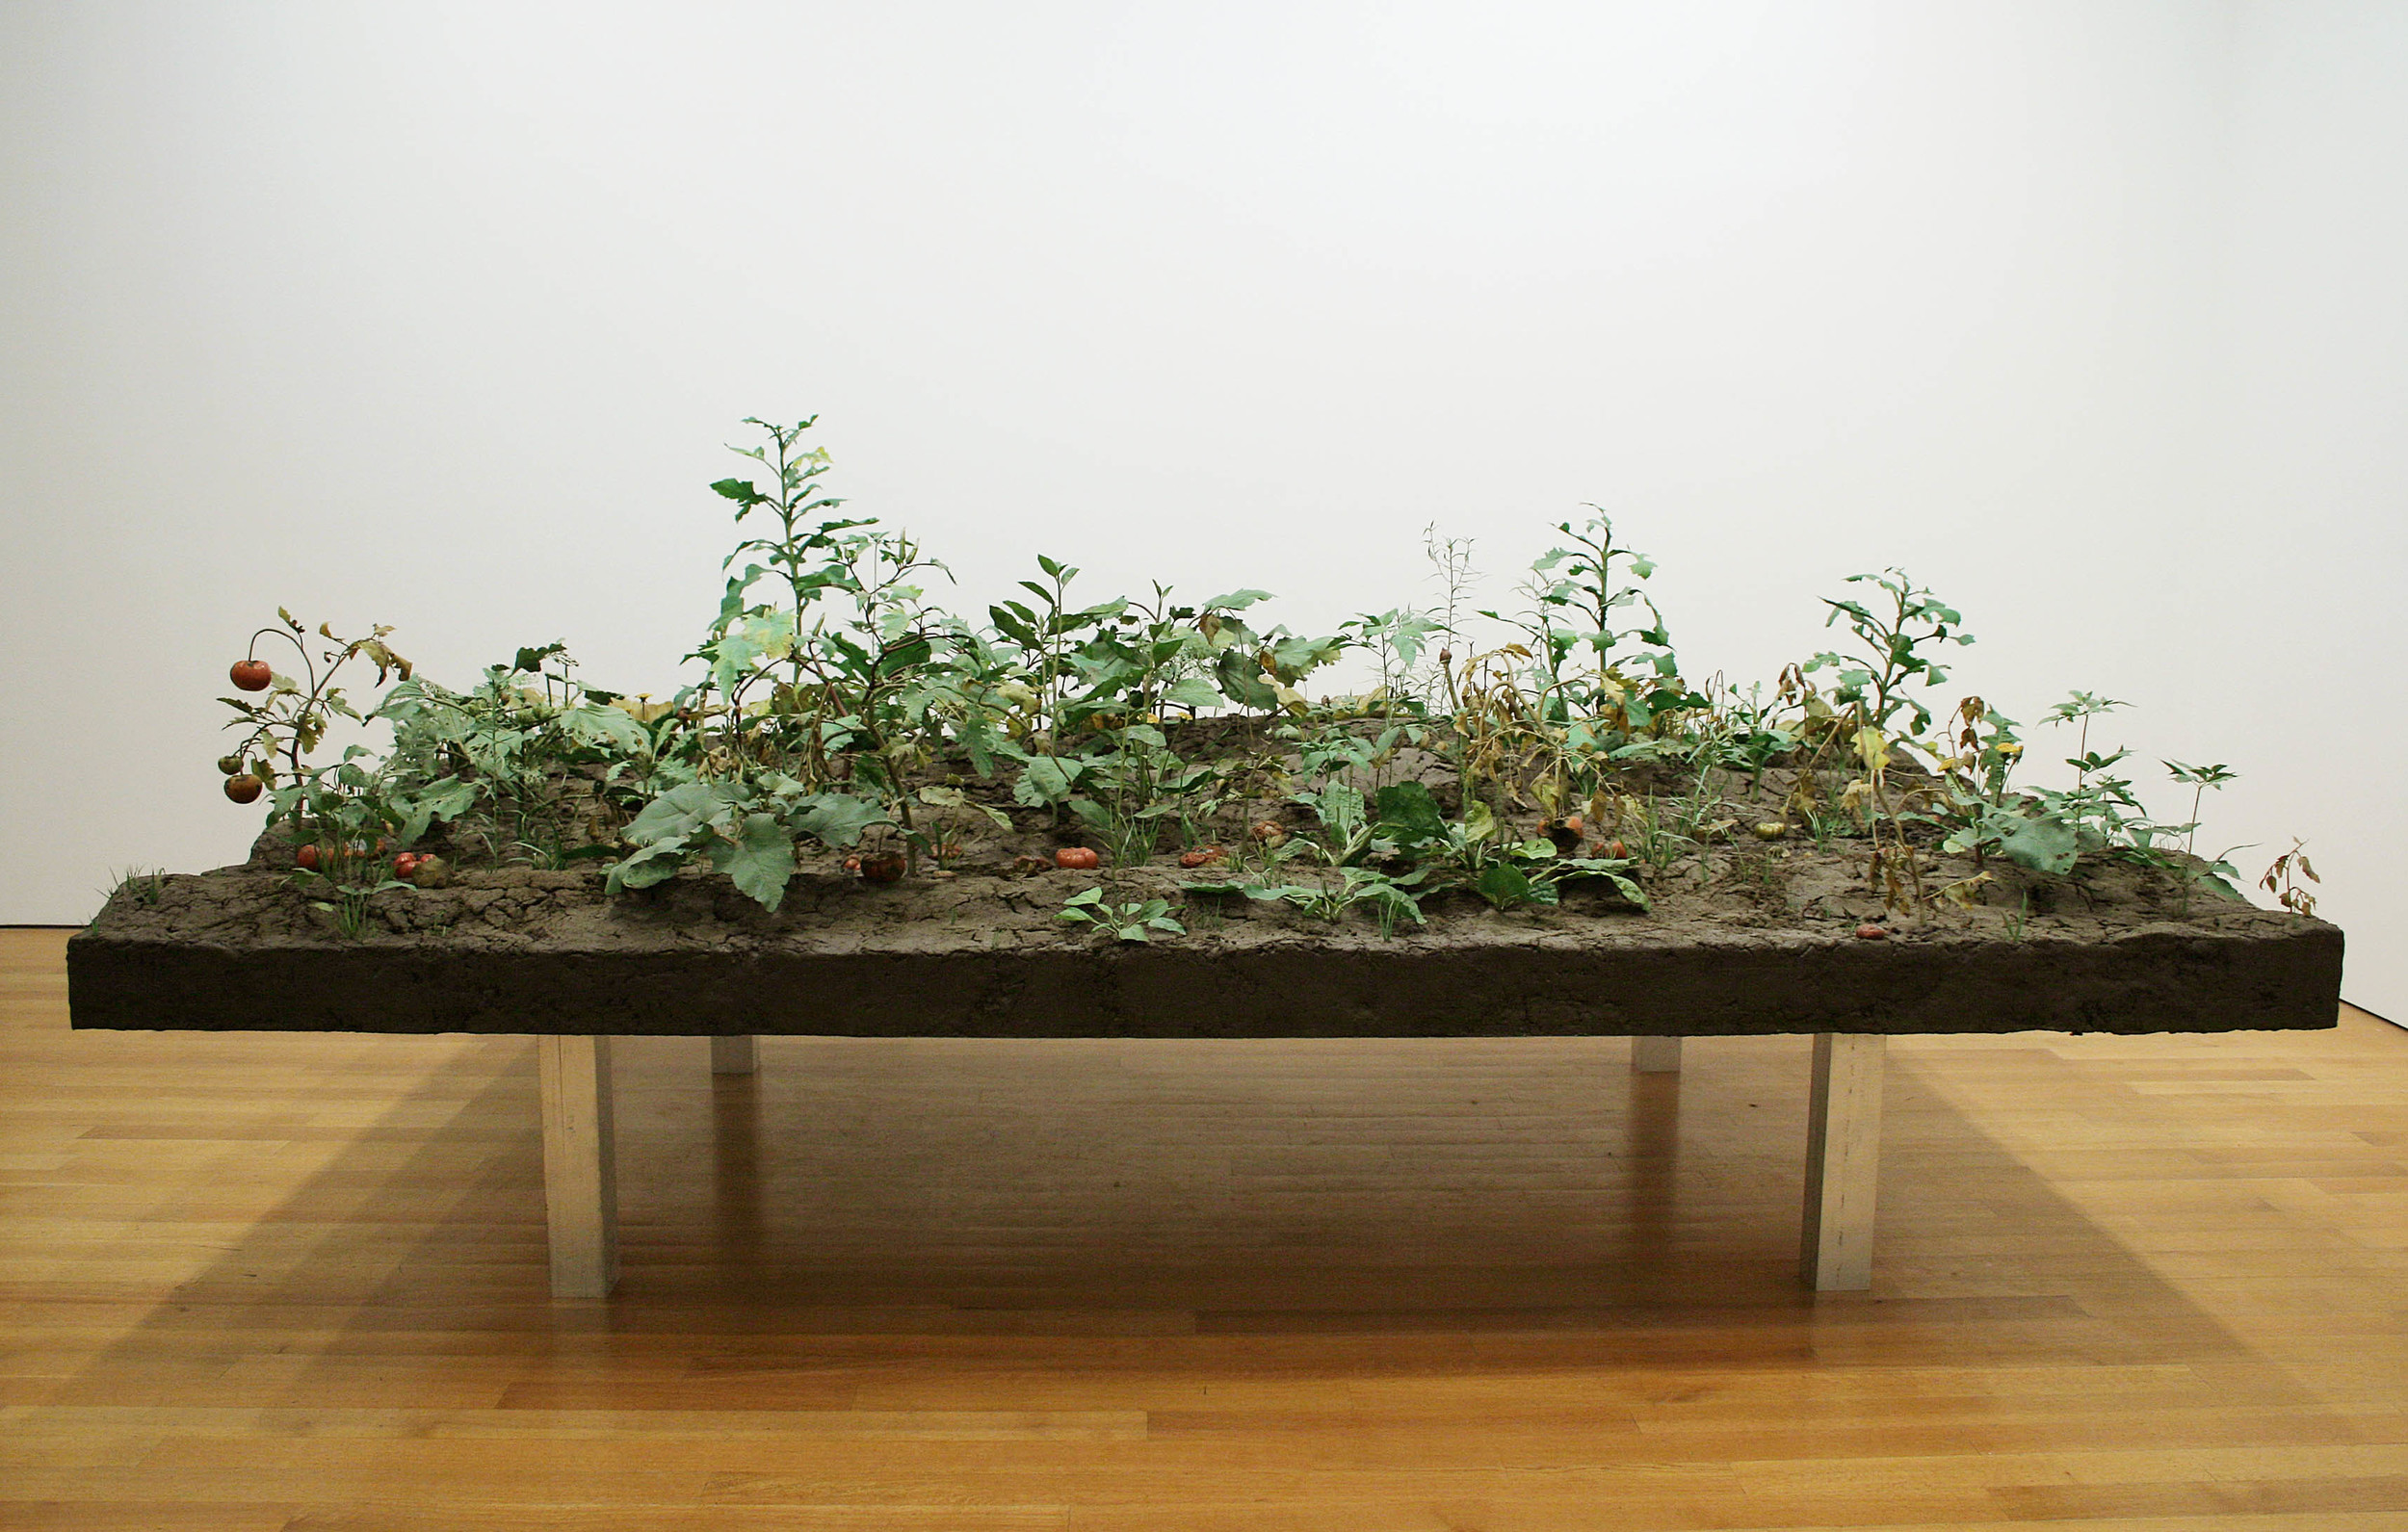  Weed Choked Garden, 1998-2006, Thermoset polymer, oil paint, PETG, stainless steel, lacquer, epoxy, and pigment, 65 x 139 x 96 1/2 inches 